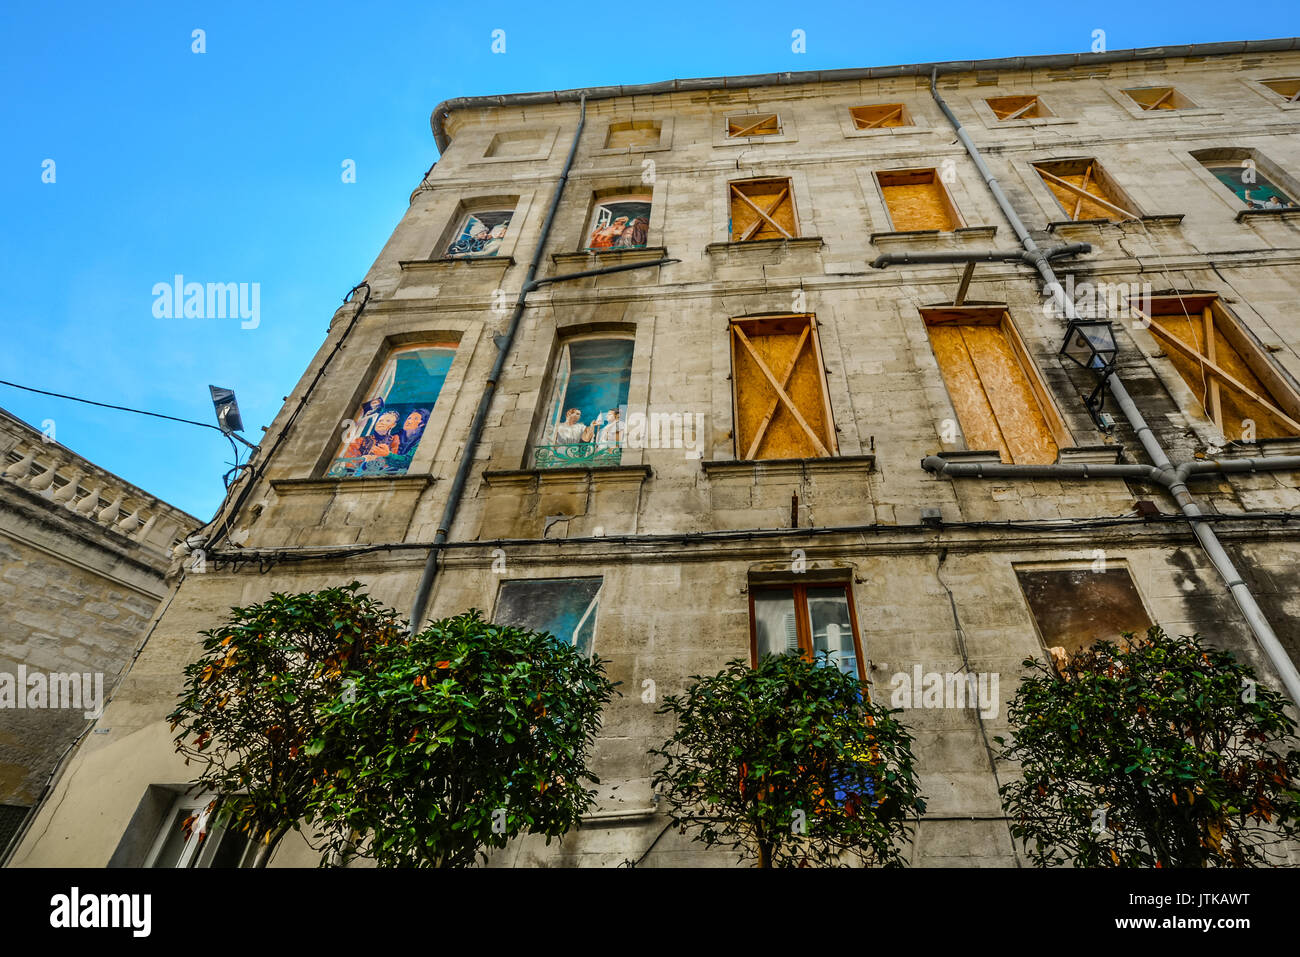 Old building in downtown Avignon France with boarded up windows and very colorfully painted scenes on the windows Stock Photo